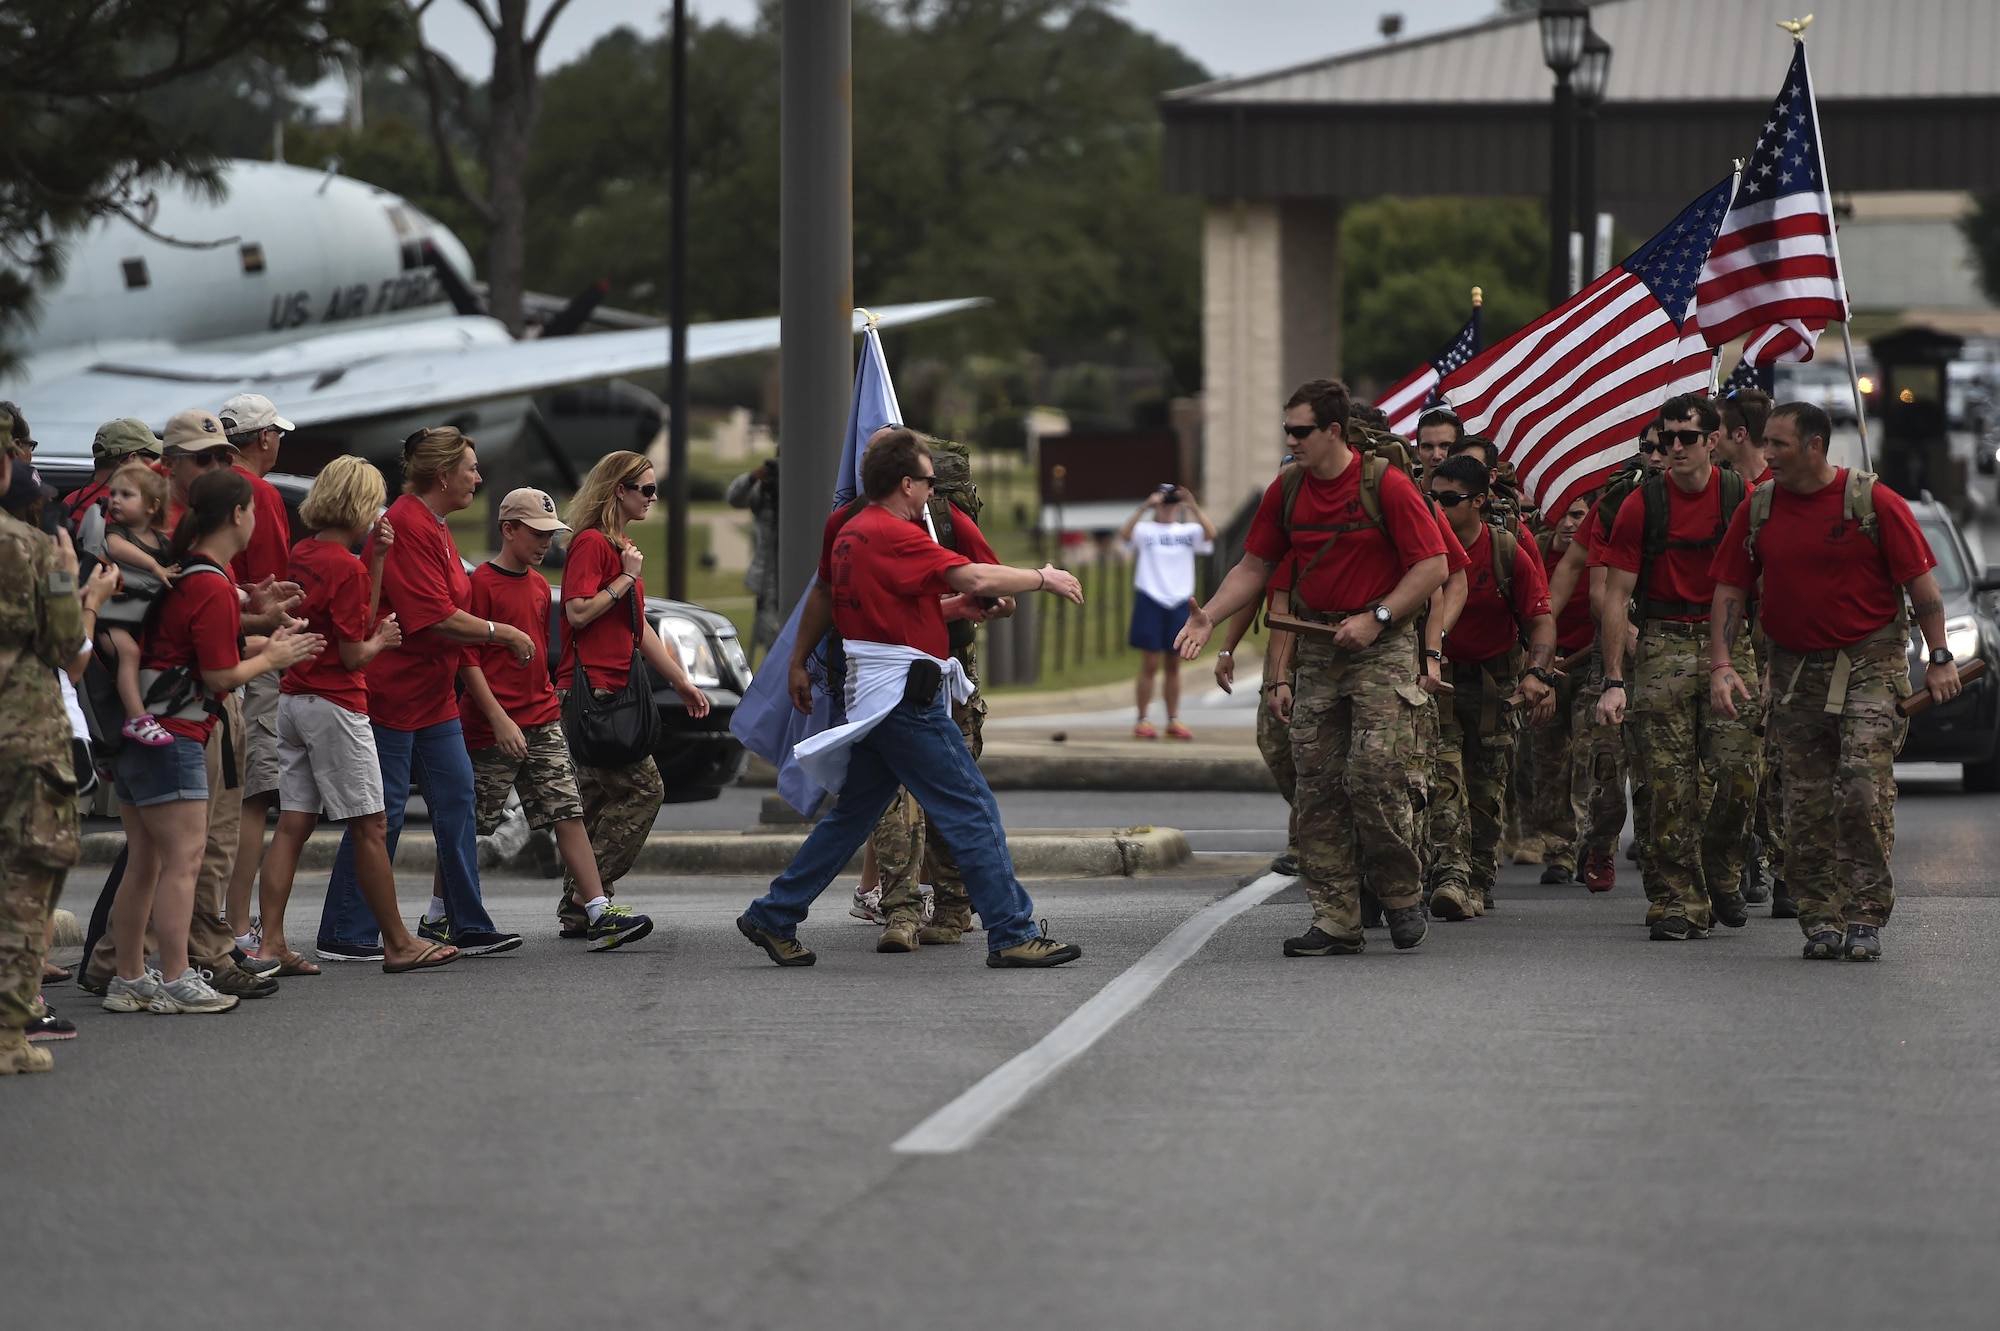 Special Tactics Airmen completed greet Gold Star families after finishing an 812-mile memorial march from Texas to Florida. The memorial march is only completed when a Special Tactics Airmen is killed in action. This march was specifically in honor of Capt. Matthew Roland and Staff Sgt. Forrest Sibley, who were killed in action Aug. 26, 2015.